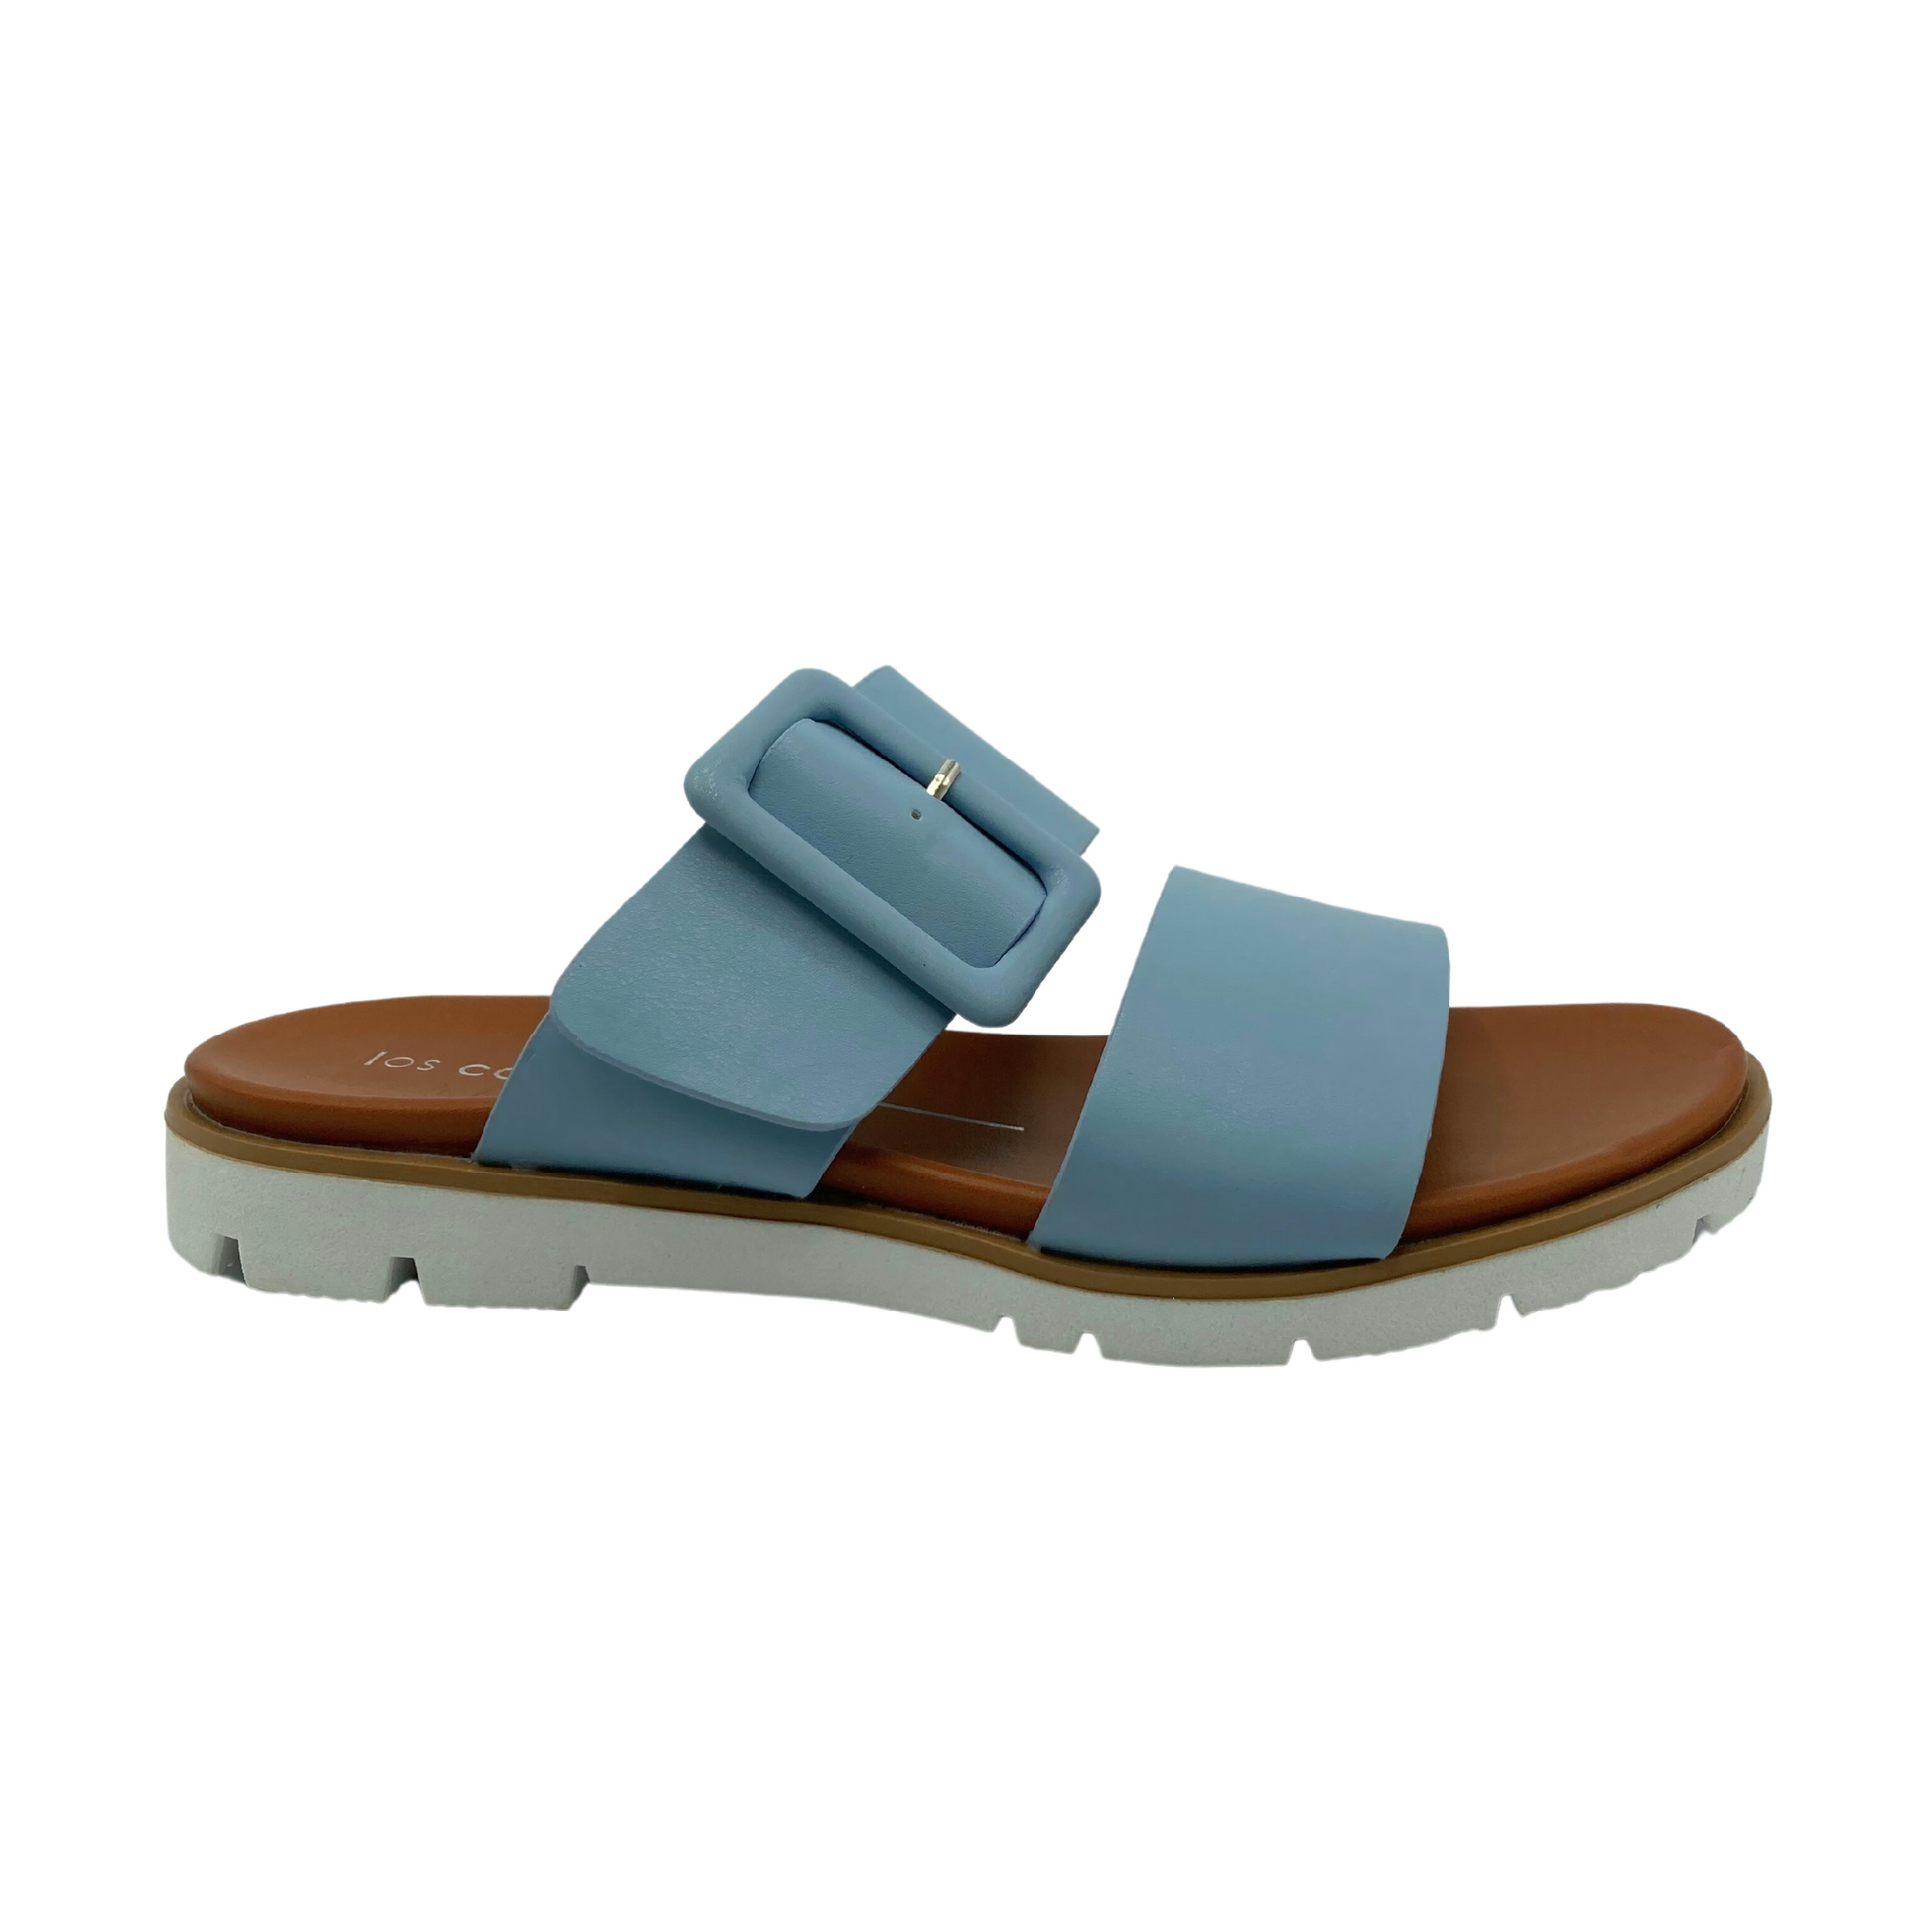 Outside view of a sandal in a baby blue tone upper.  Sole is brown and outsole is white.  Two wide straps across foot